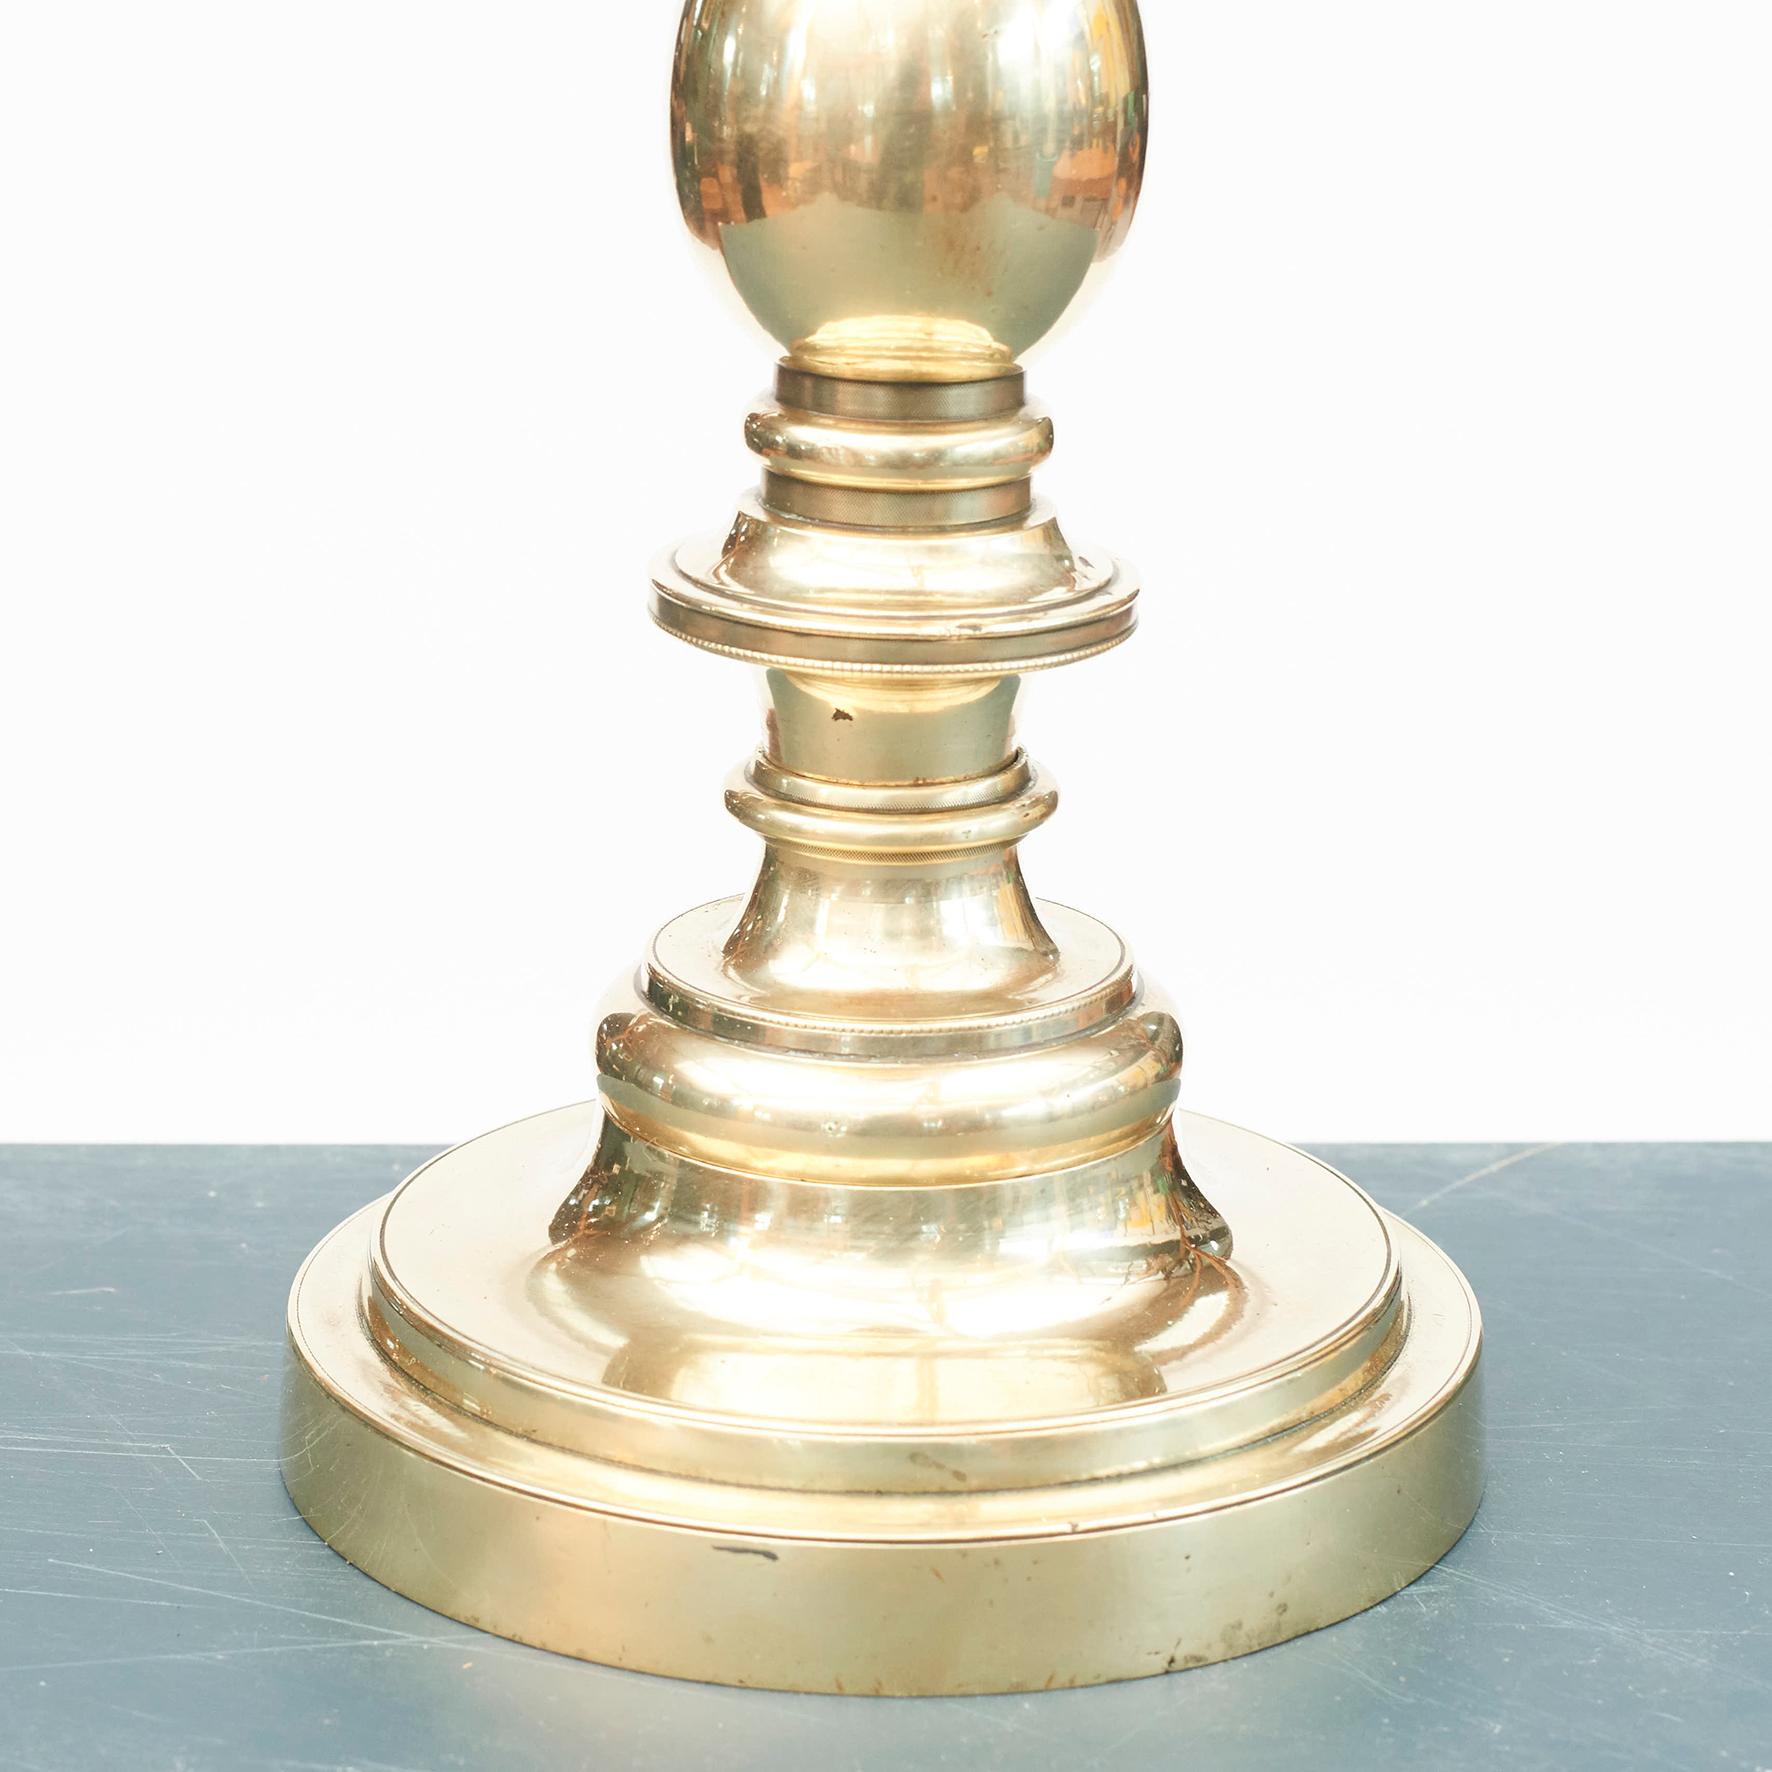 Brass table lamp. Denmark, 1920-1930.
Beautifully designed and crafted. Original top. 
Measures: Sculpture height (to socket) 36 cm, 14.17 in. Total height 62 cm, 24.41 in.

Lamp shade not included.